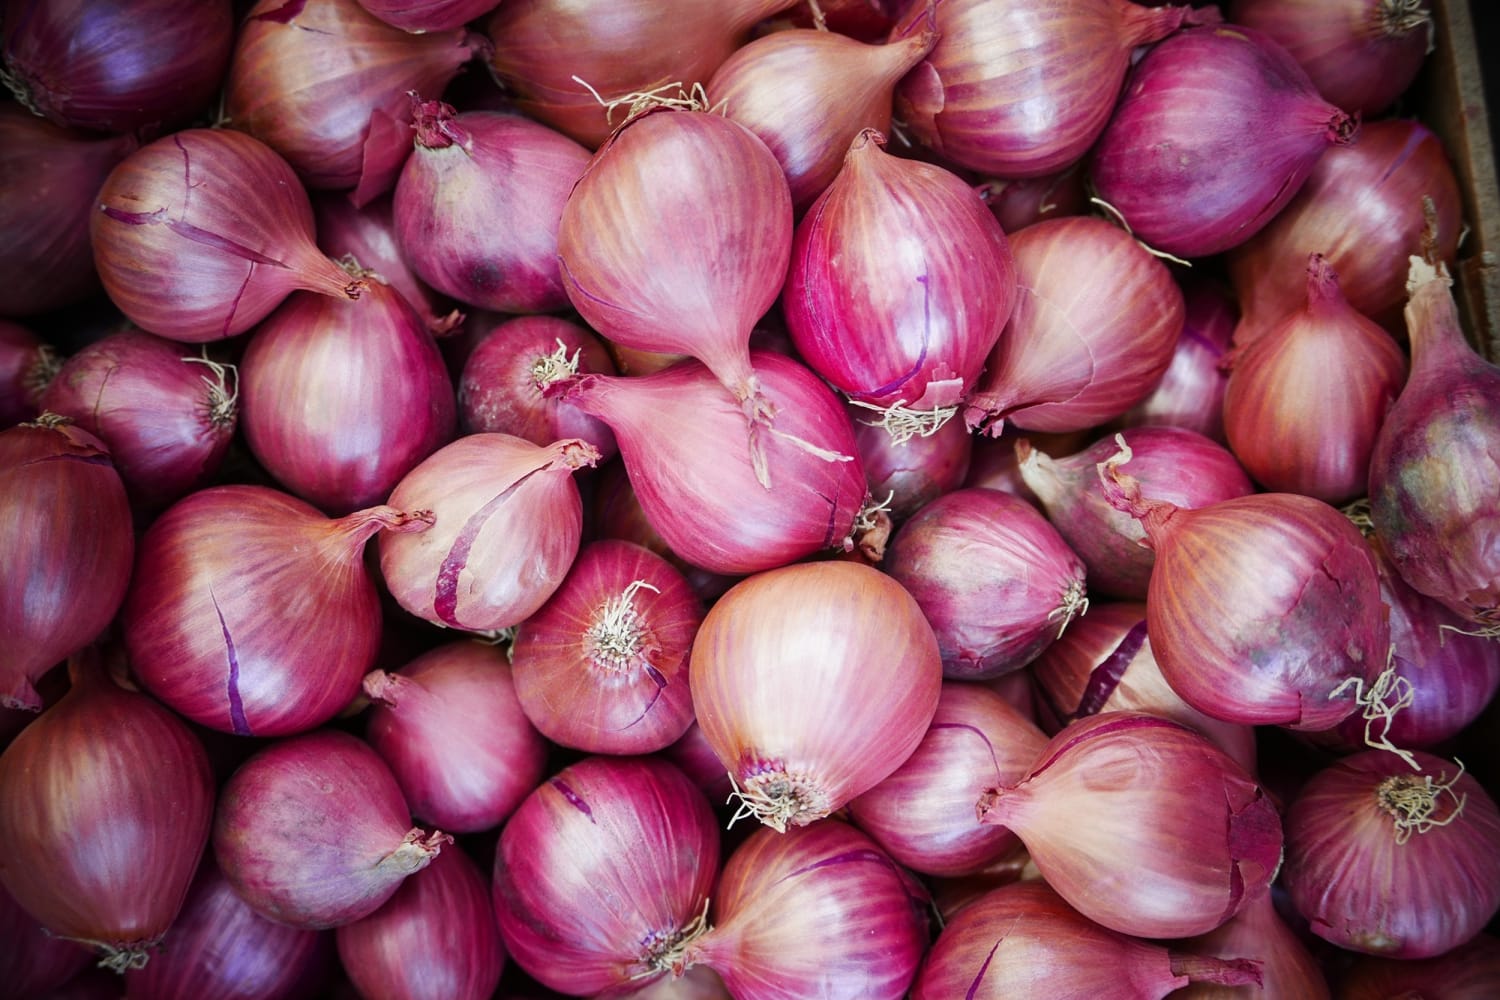 Onions from Mexico linked to salmonella outbreak in 37 states